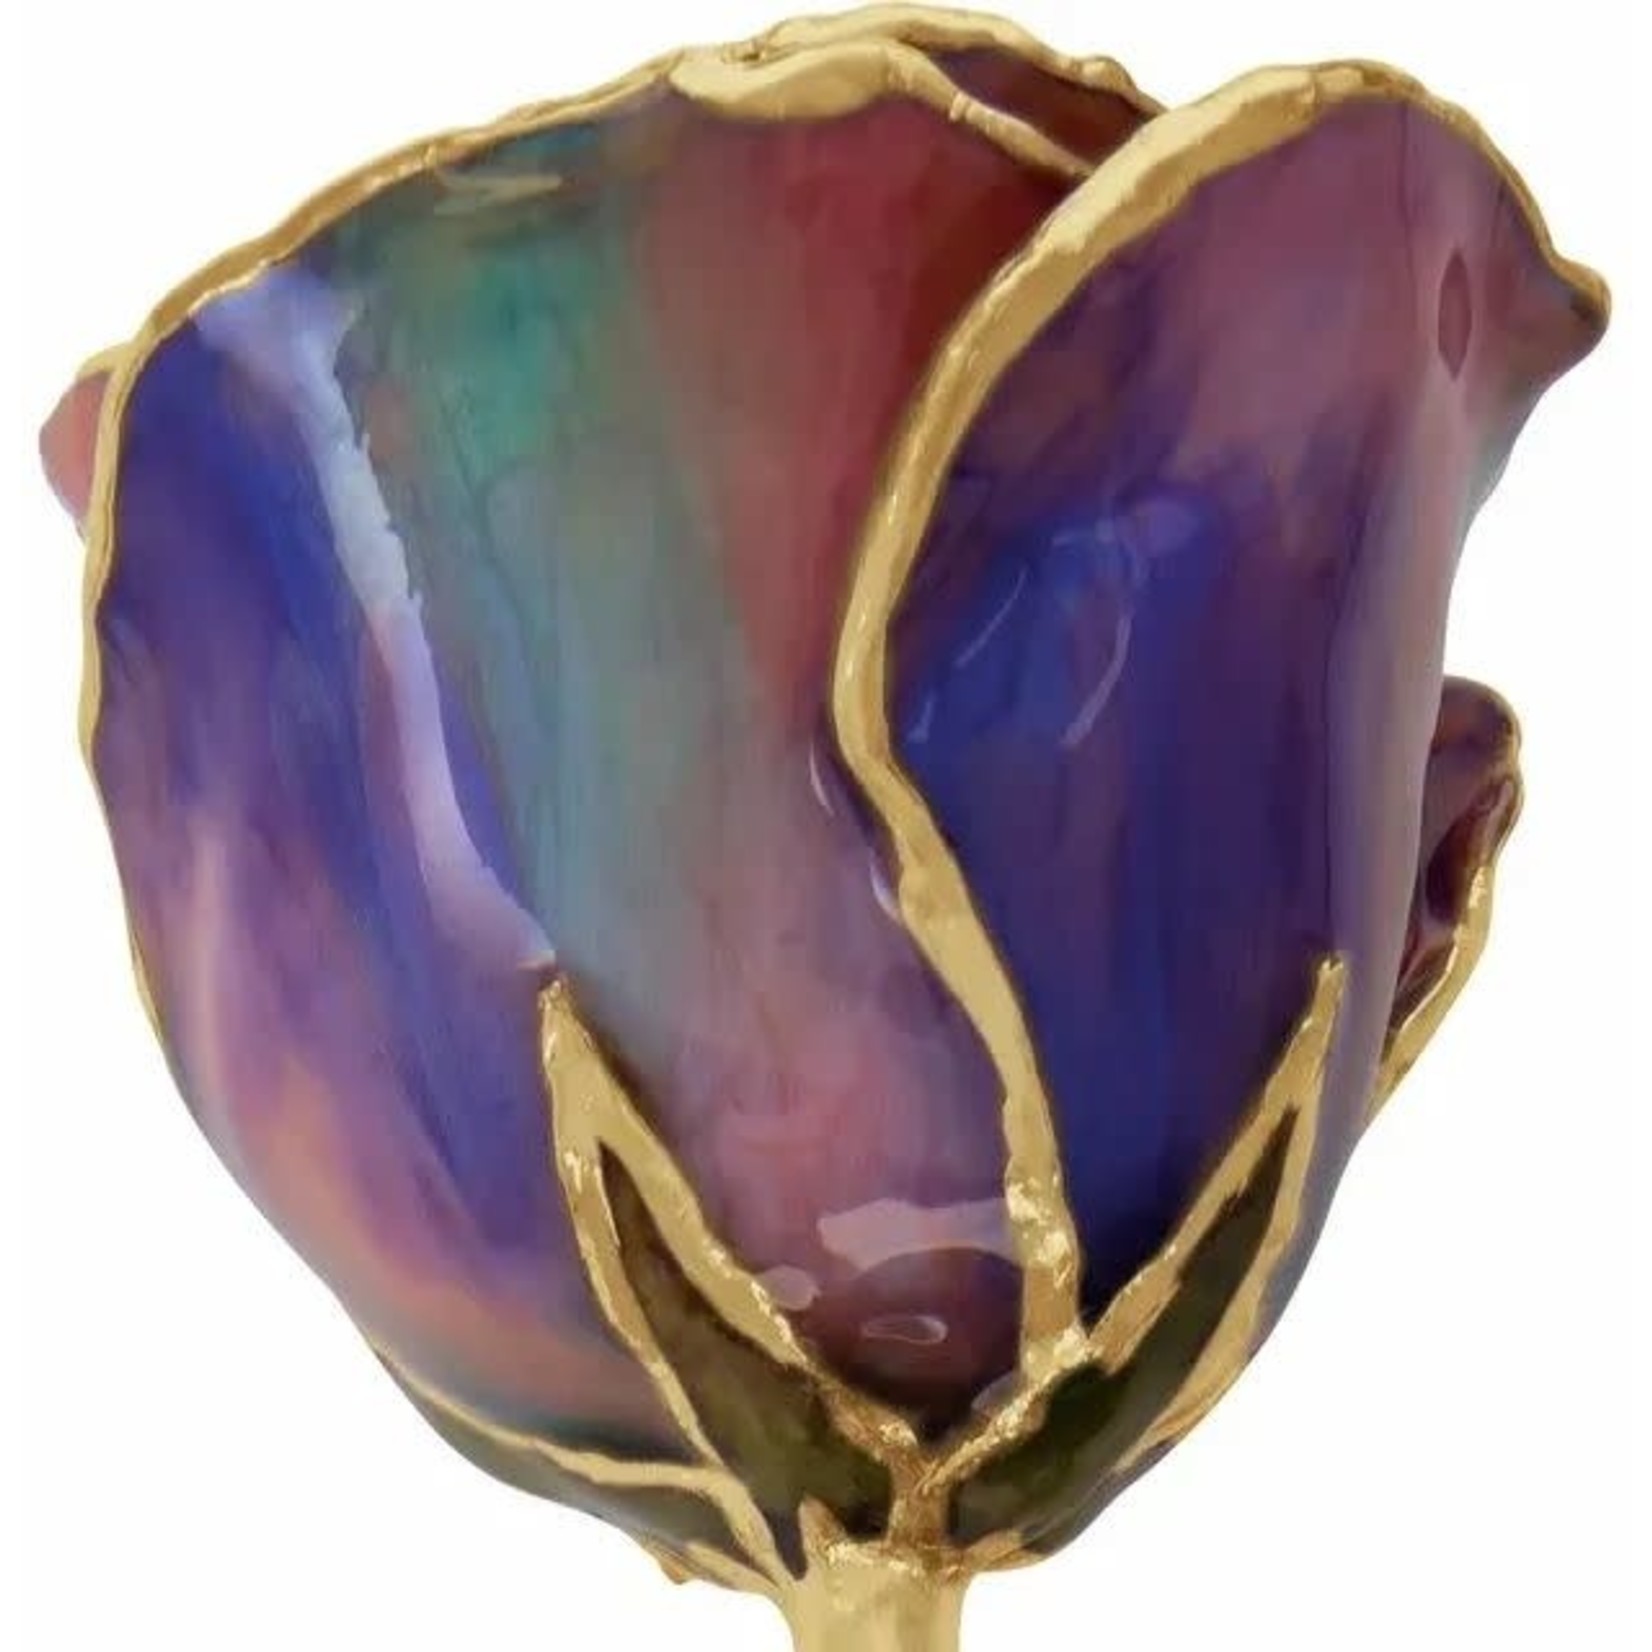 STULLER INC. Lacquer Dipped 24K Gold Trimmed Opal Rose